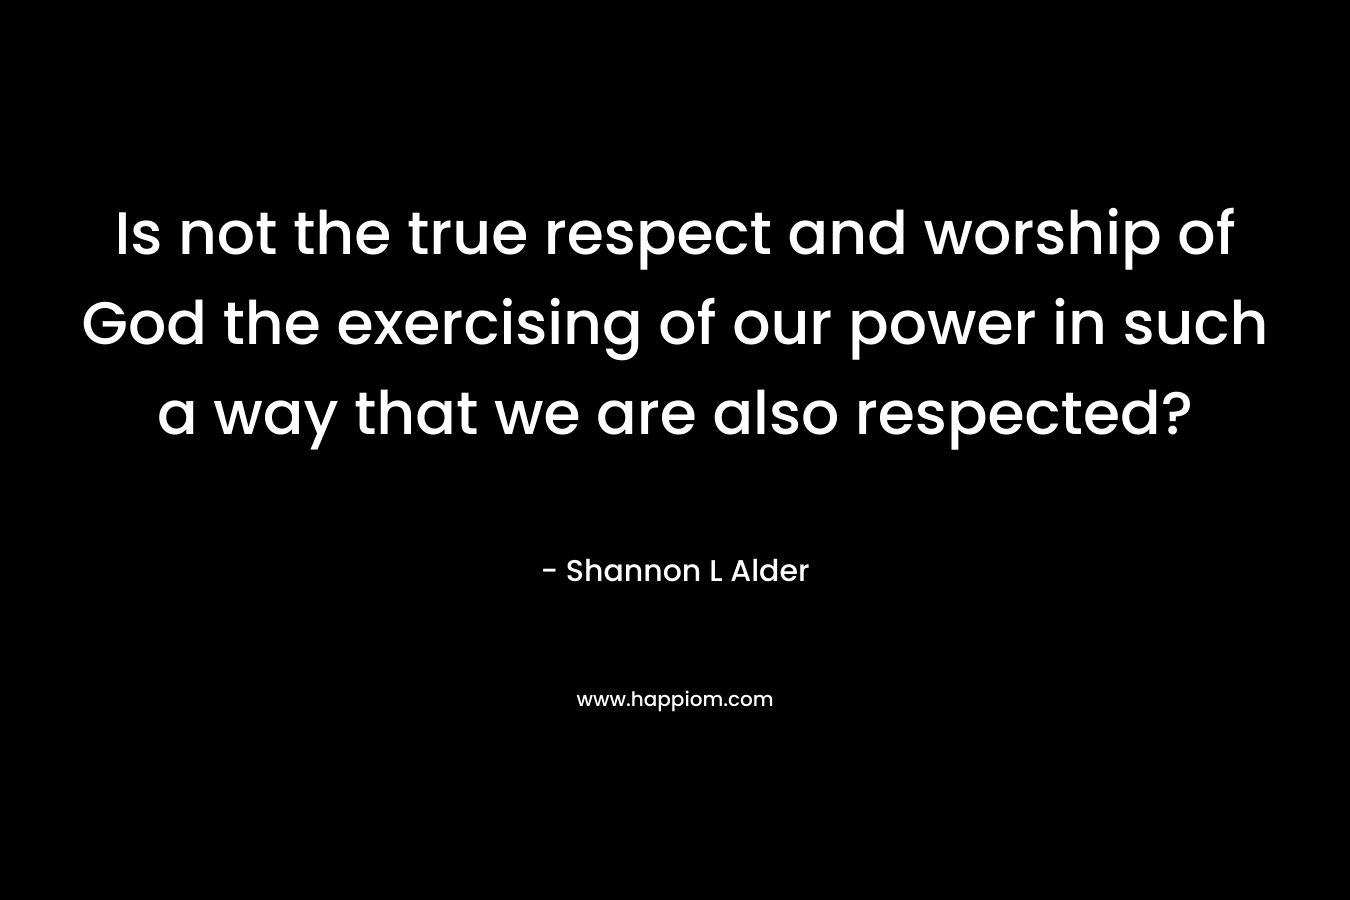 Is not the true respect and worship of God the exercising of our power in such a way that we are also respected?